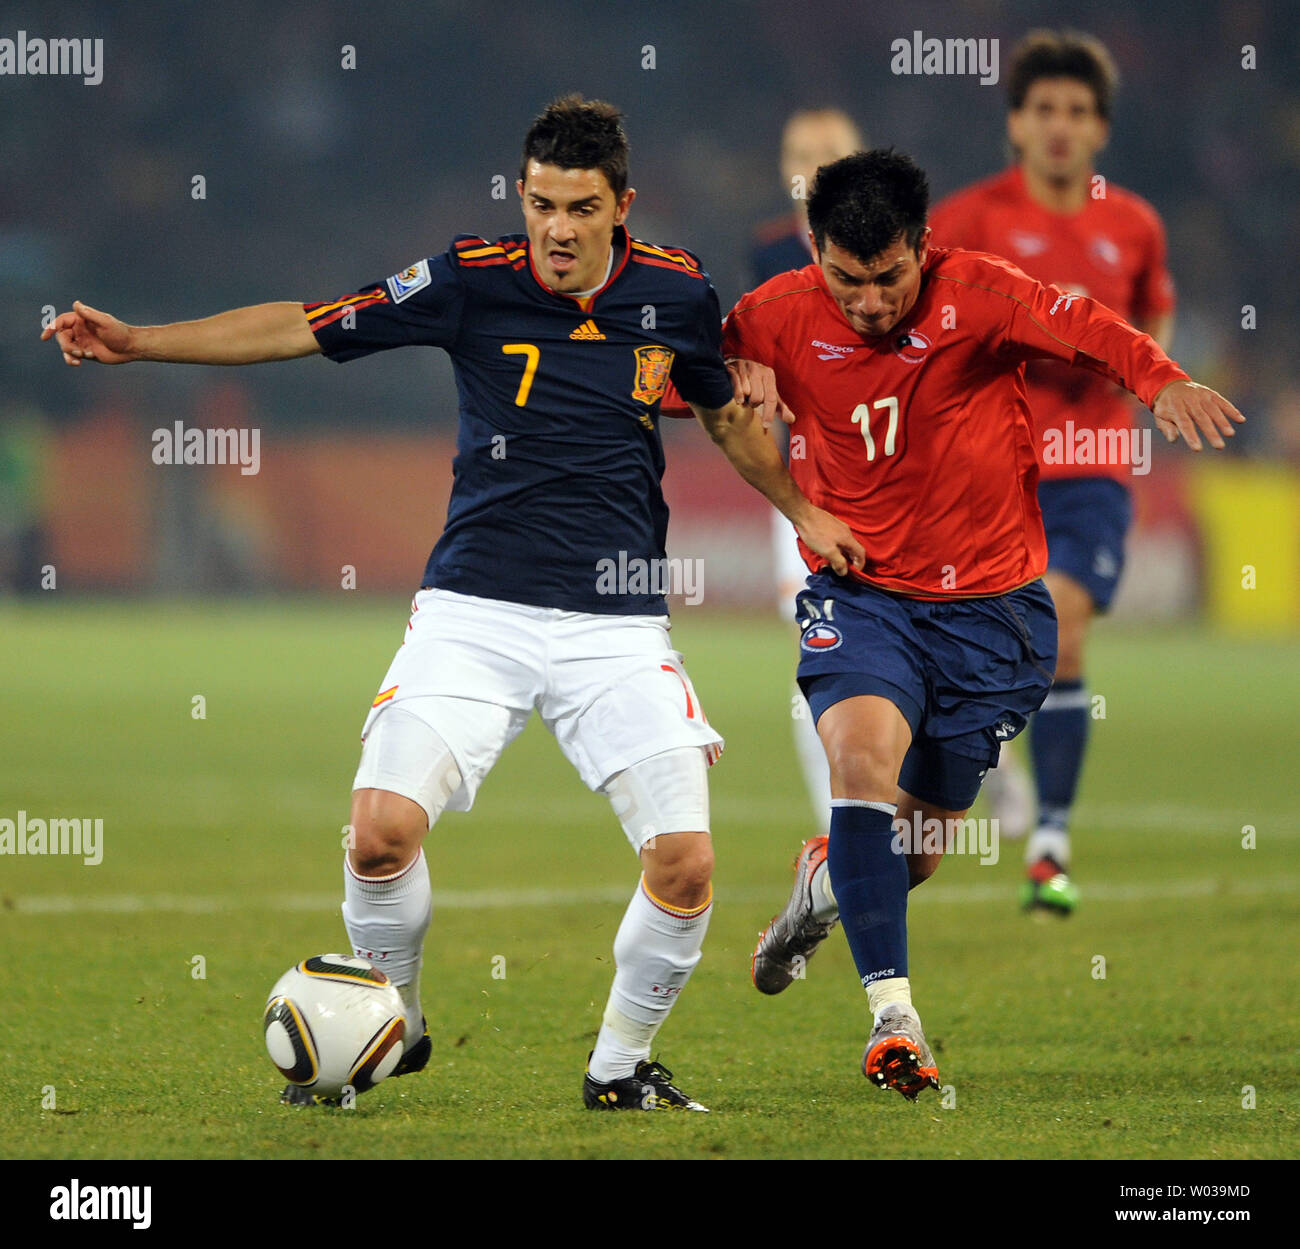 Gary Medel of Chile and David Villa of Spain chase the ball during the Group H match at the Loftus Versfeld Stadium in Pretoria, South Africa on June 25, 2010. UPI/Chris Brunskill Stock Photo